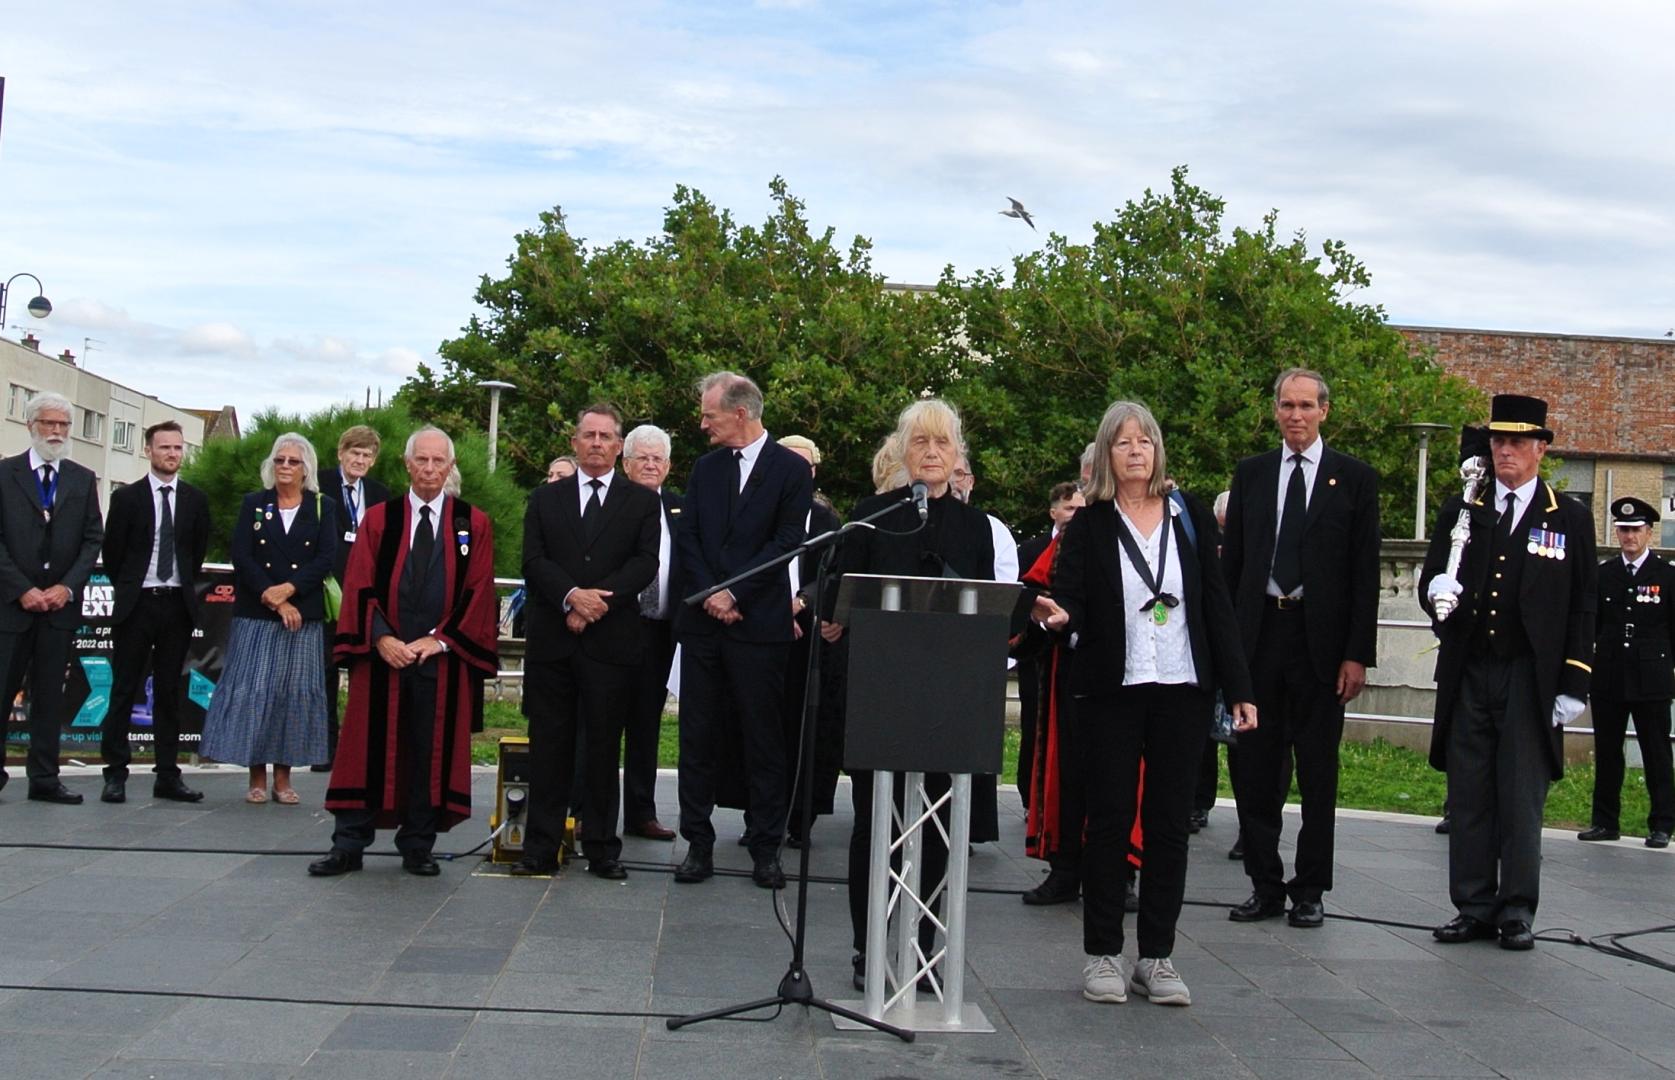 A photo taken at the North Somerset Proclamation of King Charles III on Sunday 11 September 2022.